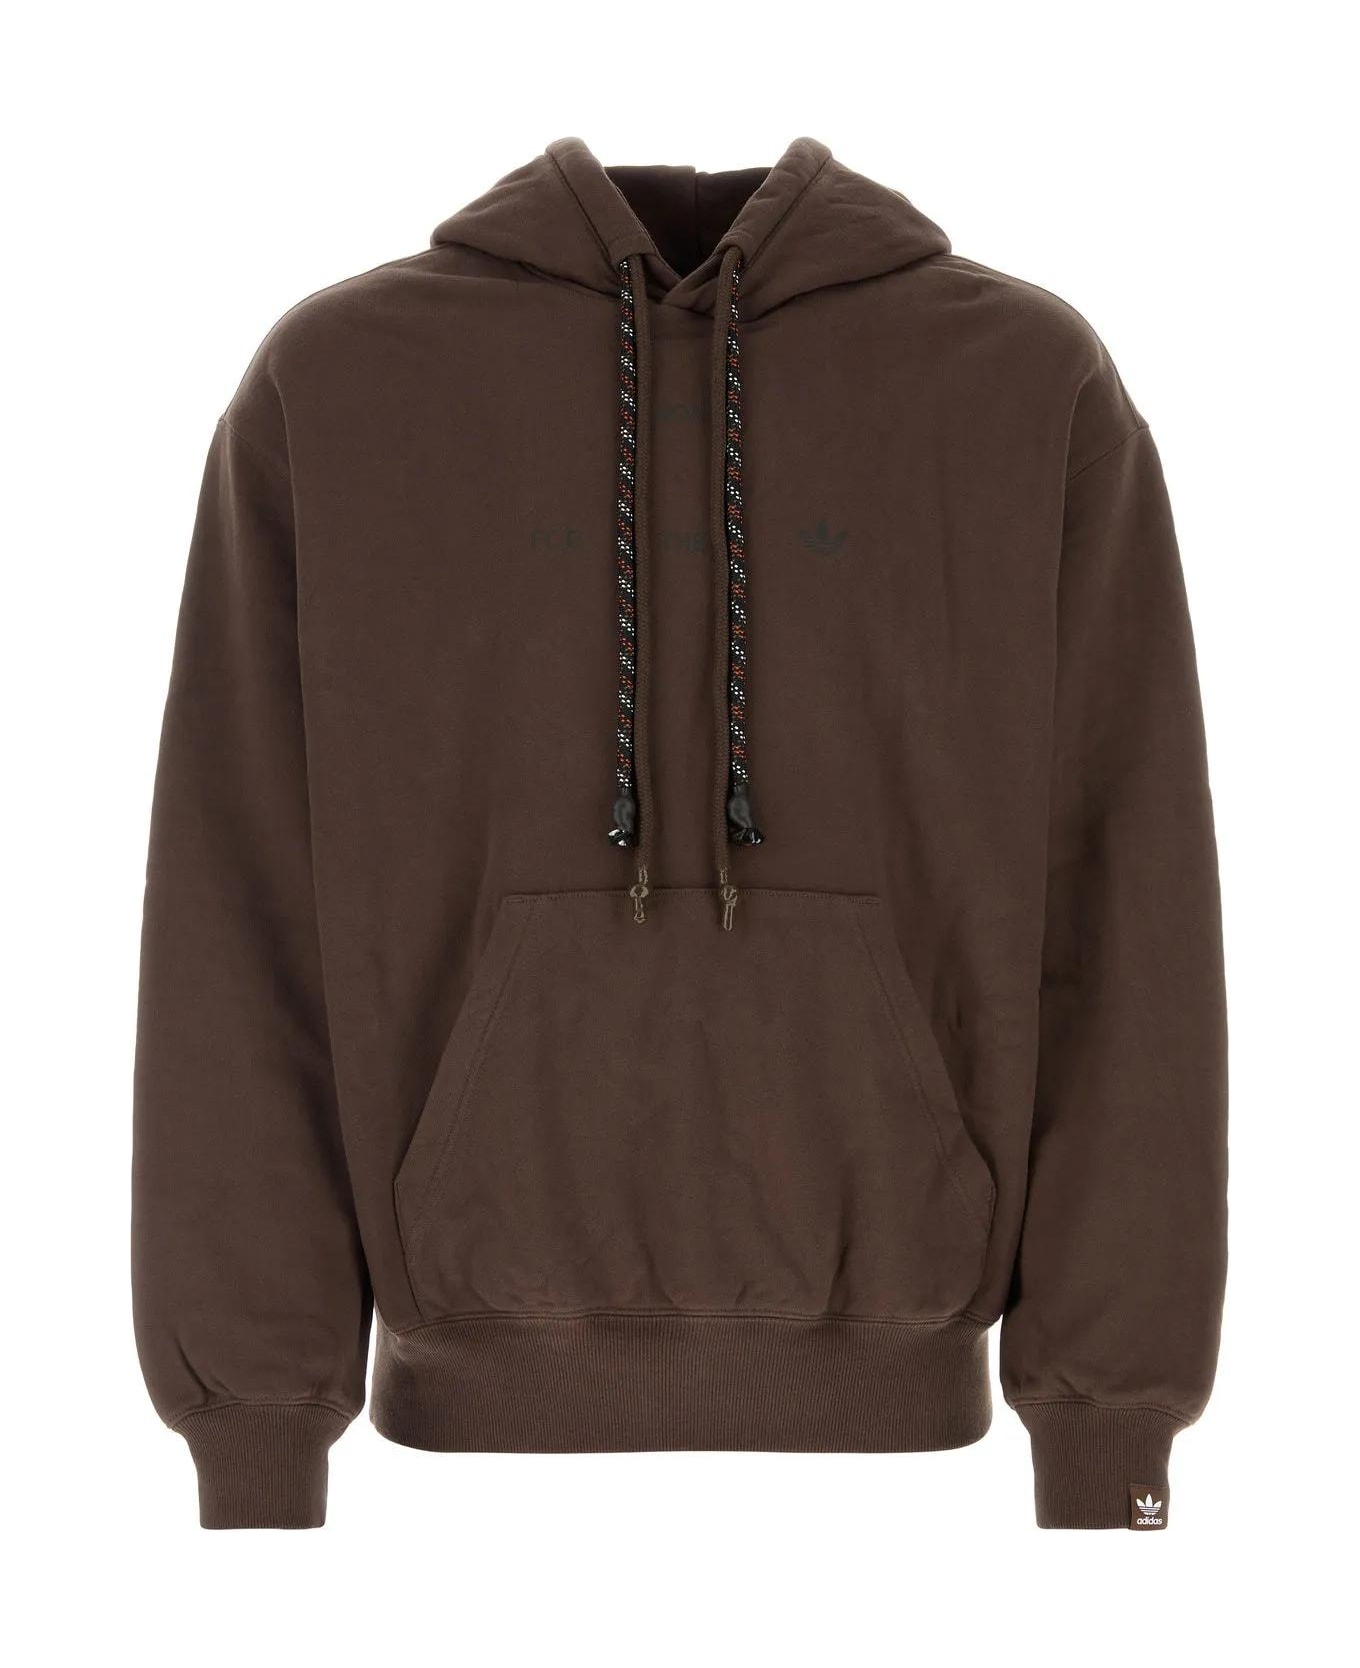 Adidas Brown Cotton Adidas X Song For The Mute Sweatshirt - BROWN